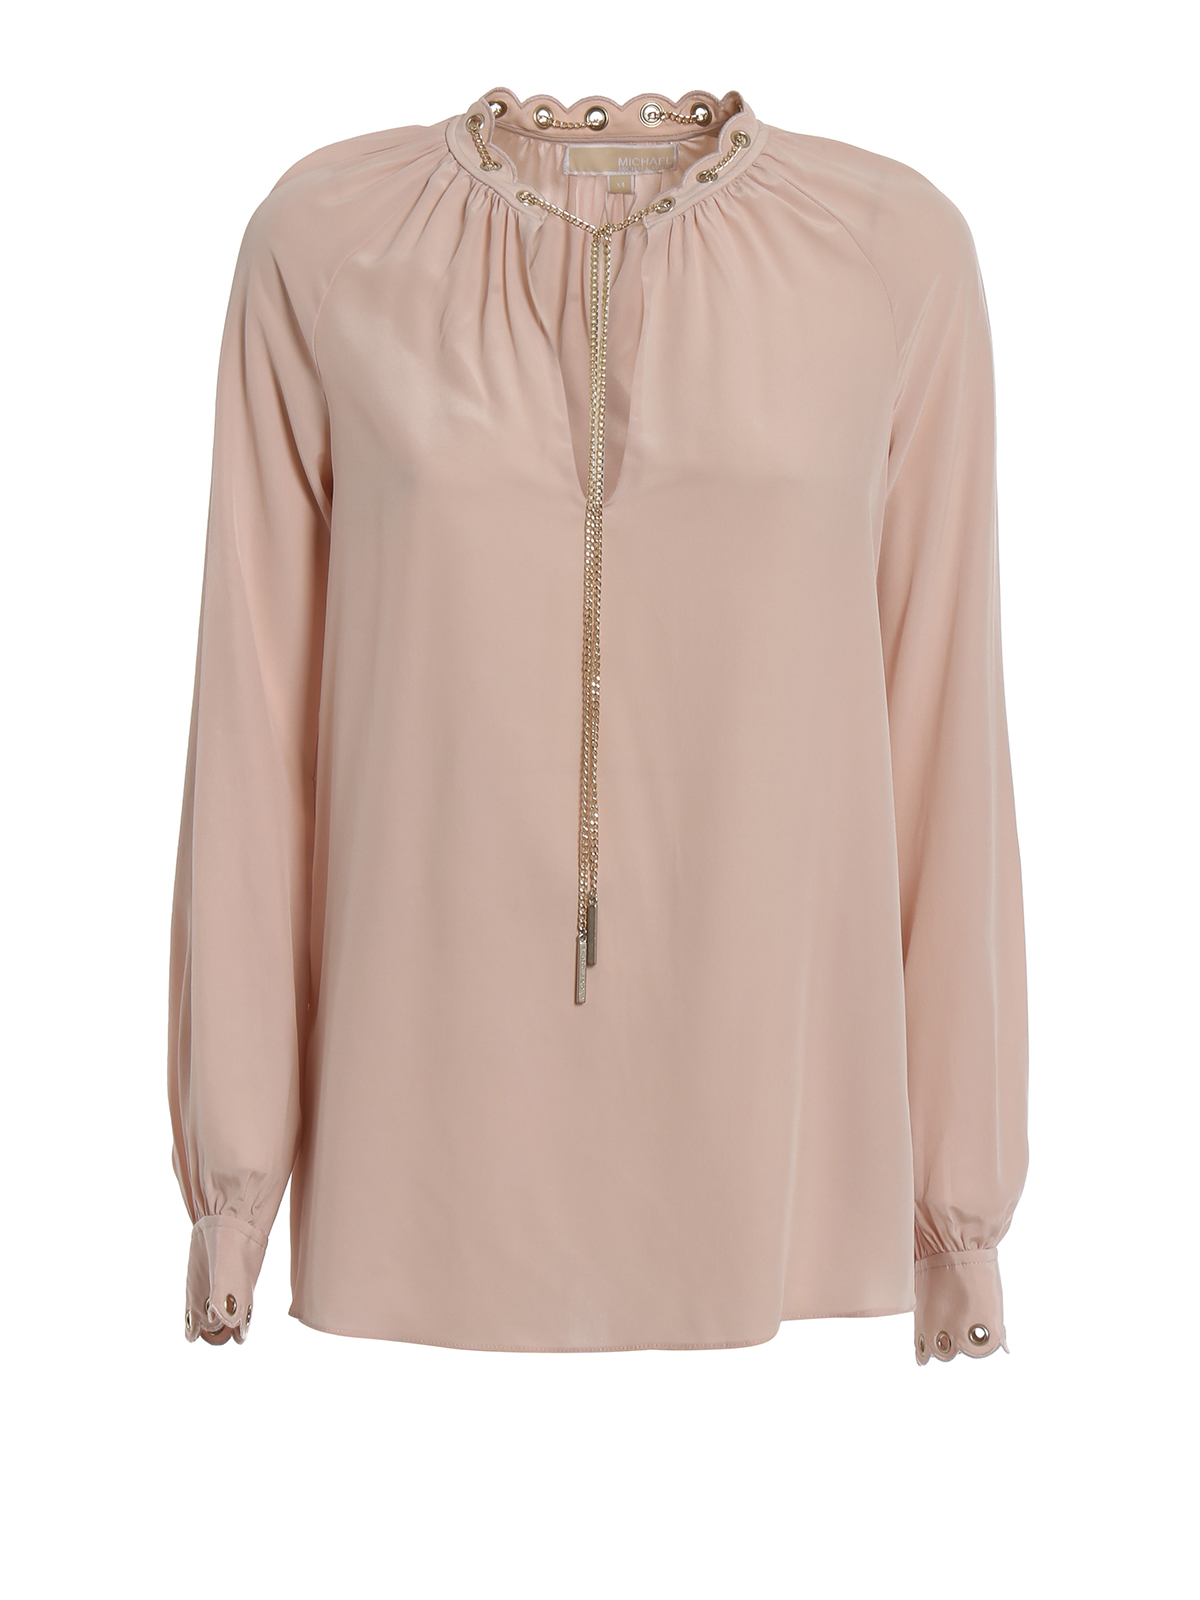 Blouses Michael Kors - Silk blouse with light gold chain and eyelets -  MU84LJR96K696